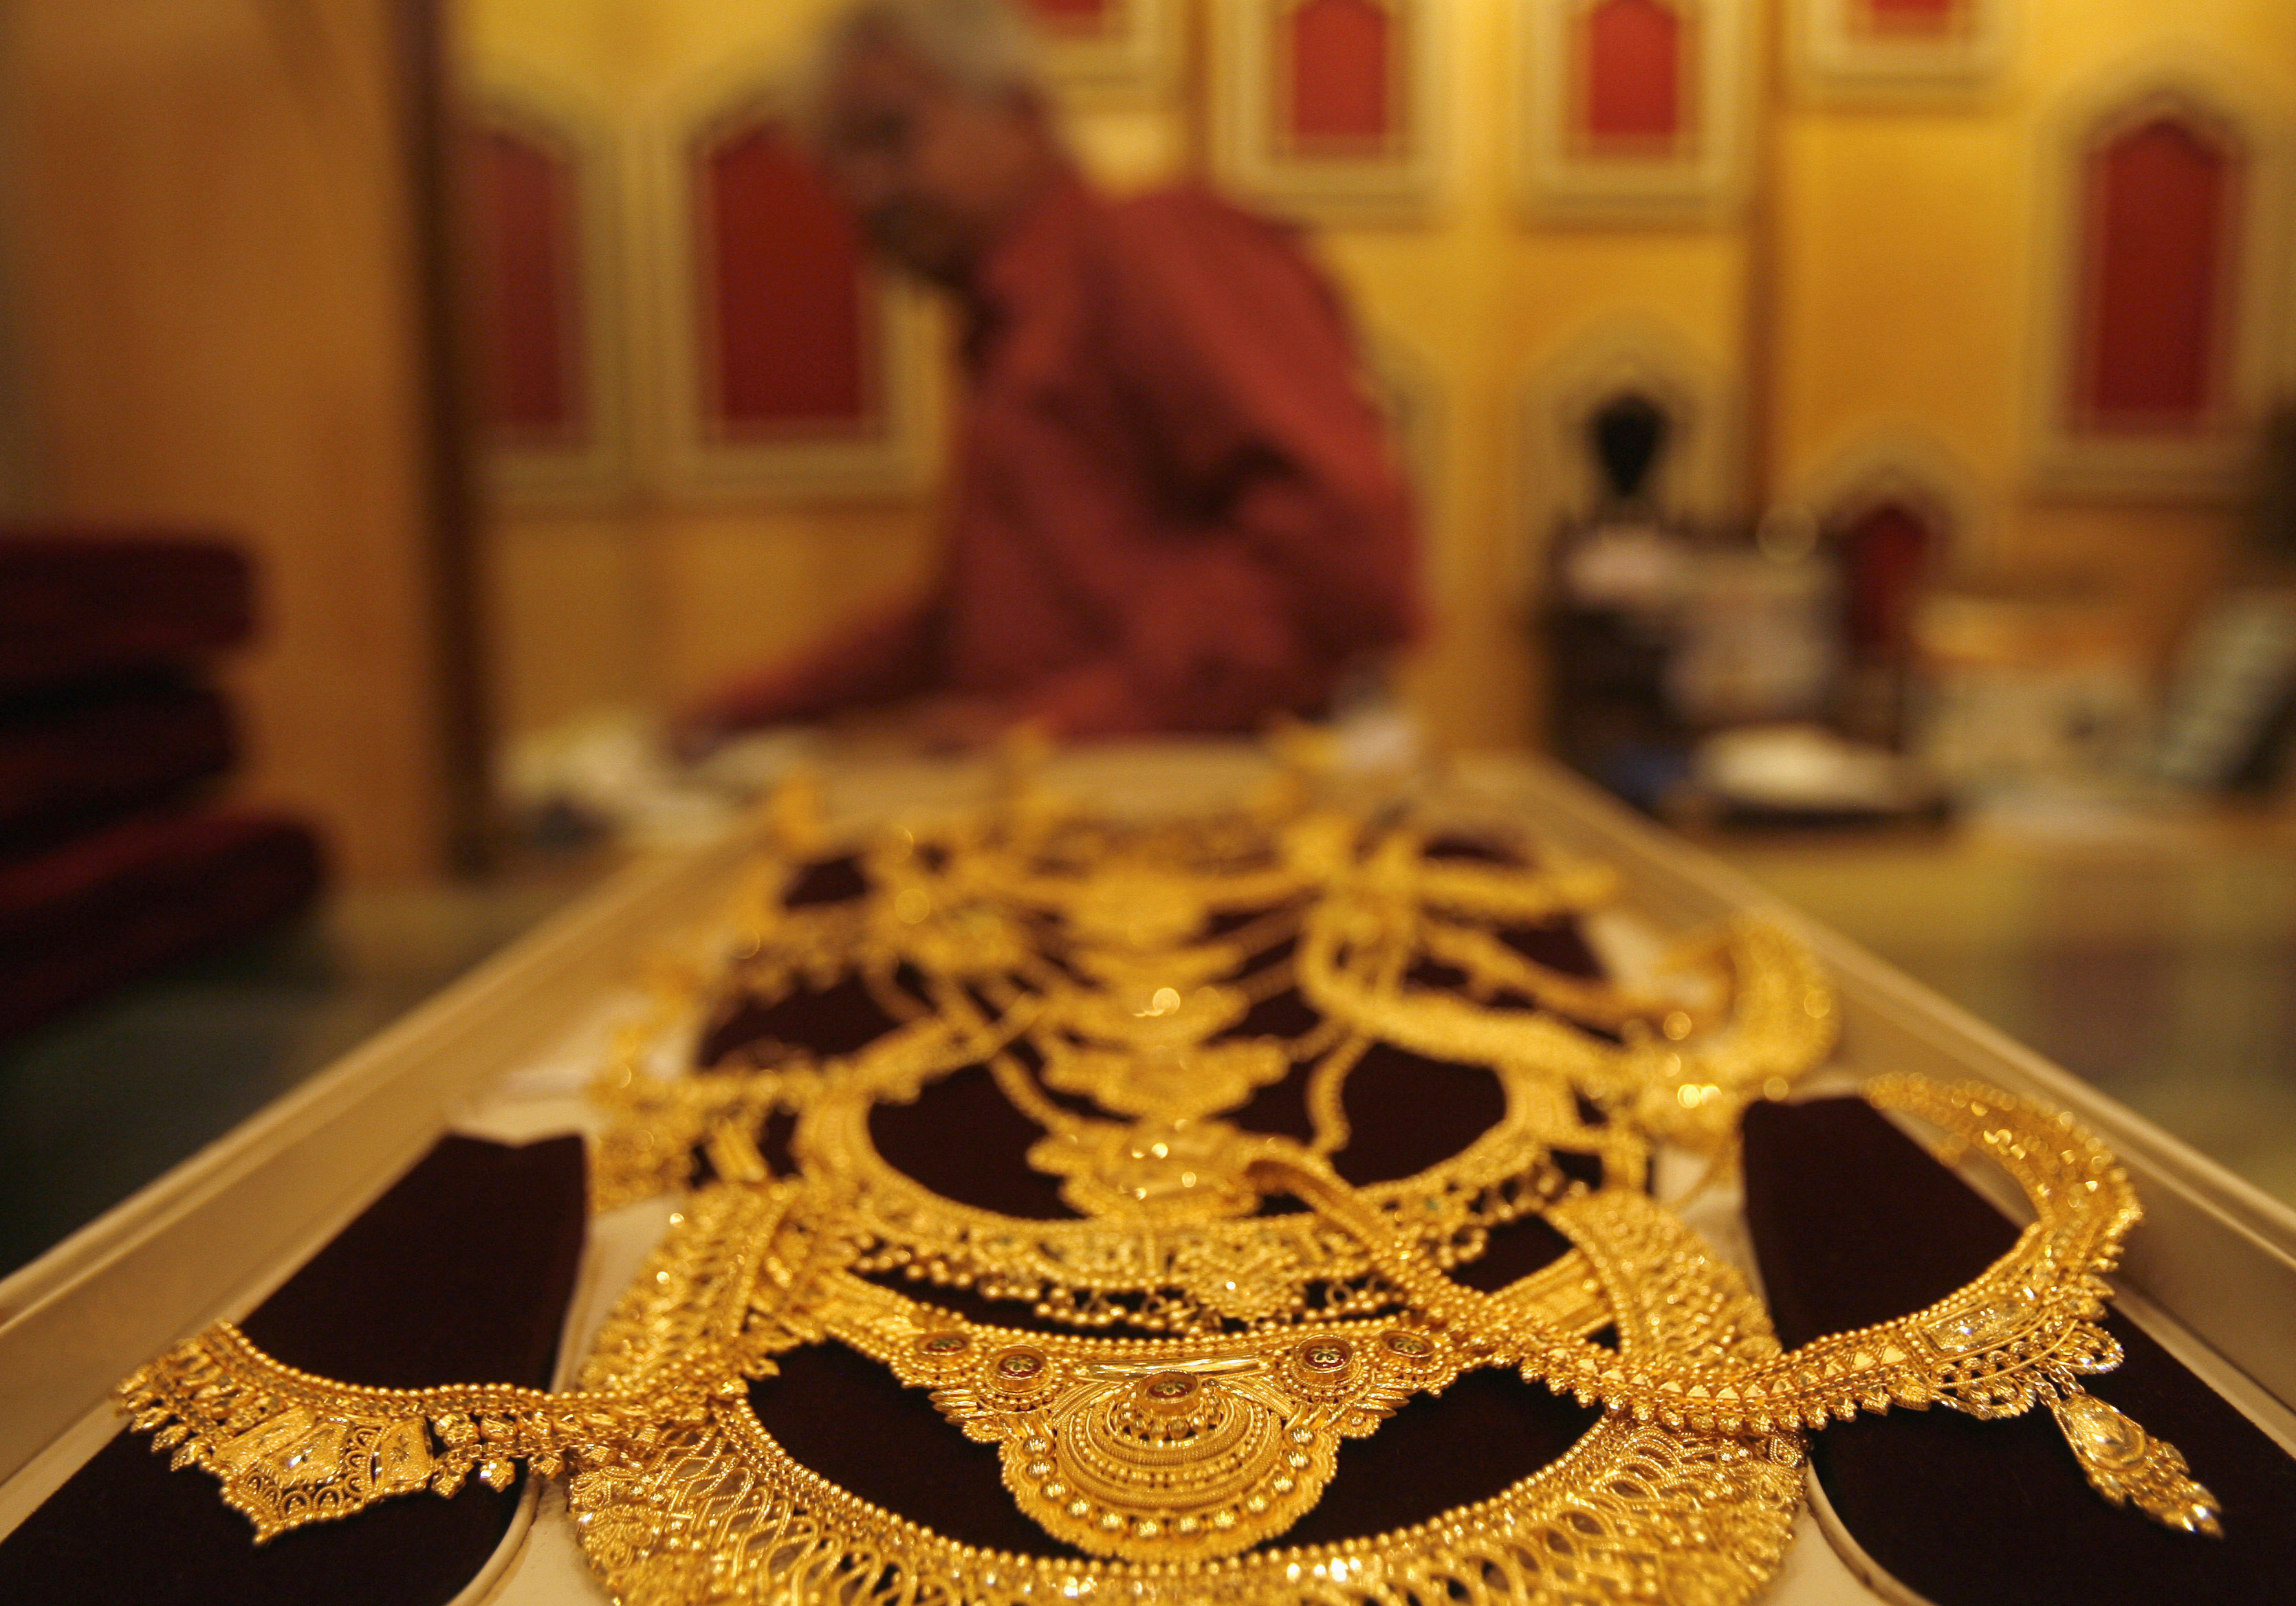 Gold jewellery is displayed at a jewellery shop in Kolkata